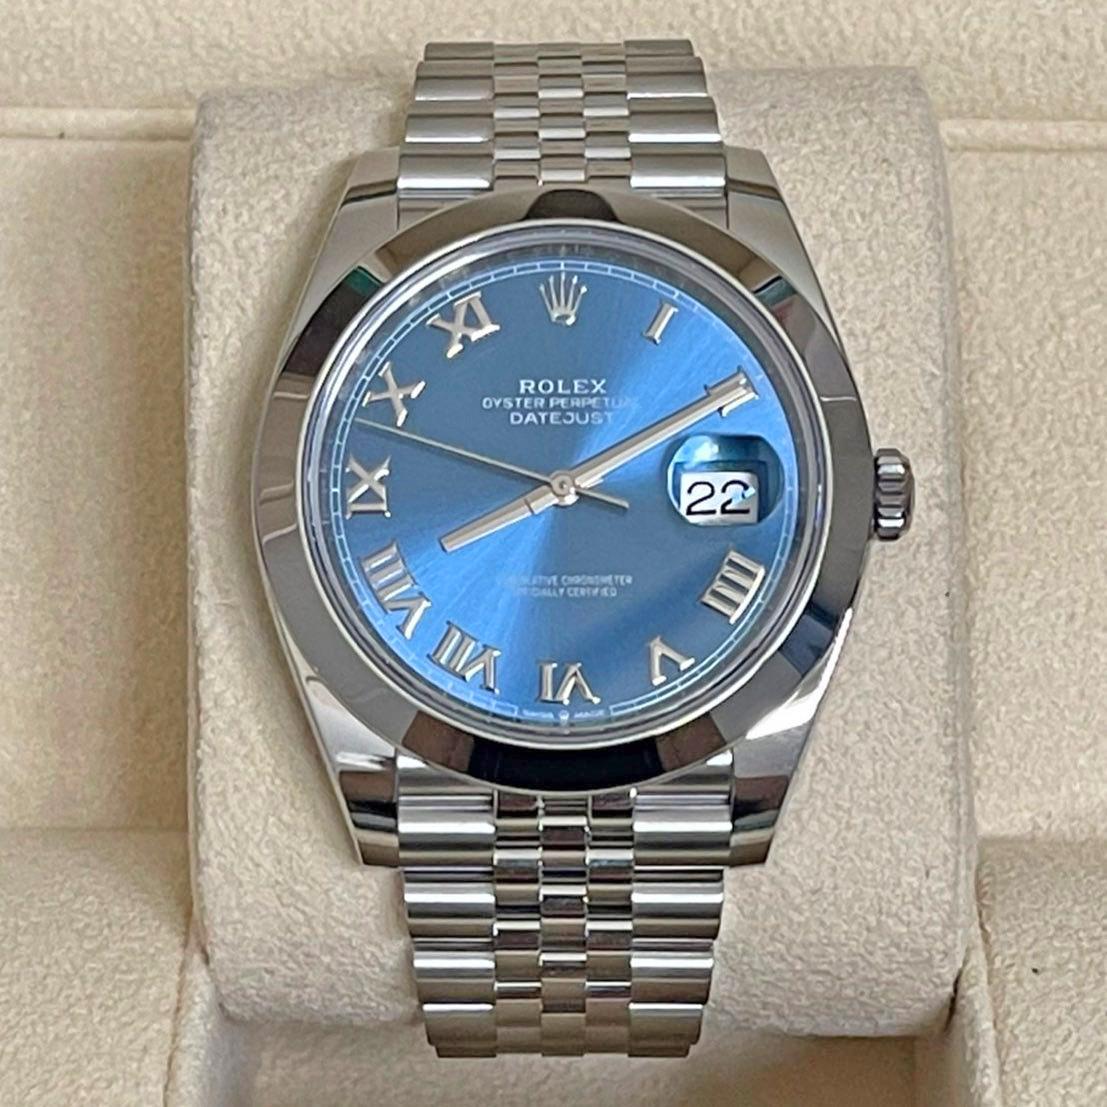 Unworn Classic watch Rolex Datejust 41, Oystersteel, Ref# 126300-0018 - luxury, elegance and practicality.

Make: Rolex
Model: Datejust 41
Reference: 126300-0018
Diameter: 41 mm
Case material: Oystersteel
Dial color: Azzurro blue
Bezel Type: